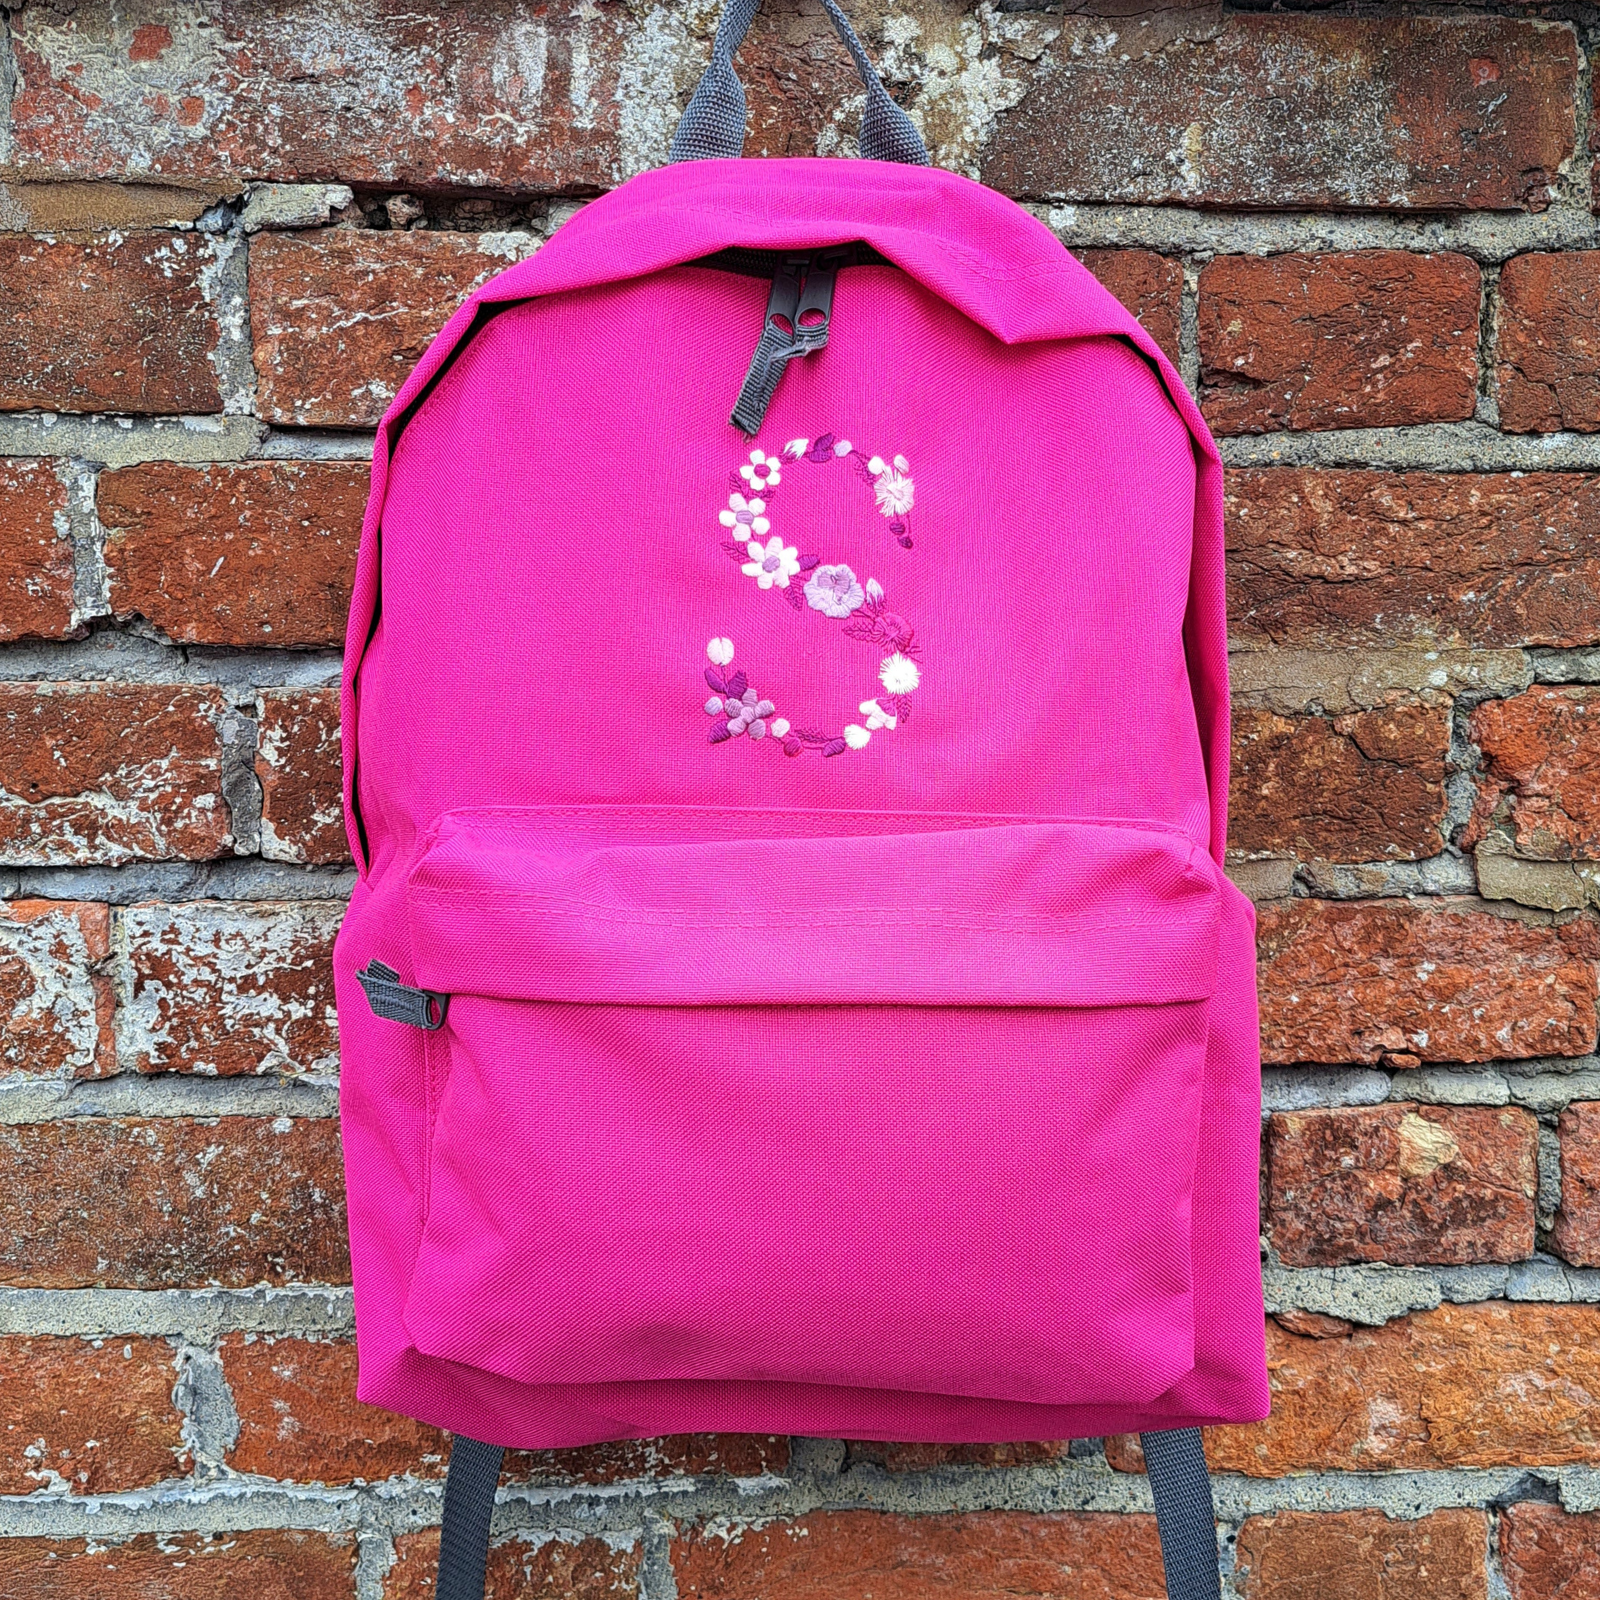 Image of a fuchsia pink coloured junior rucksack that has been embroidered with a capital S which is formed from many different smaller flowers and leaves.